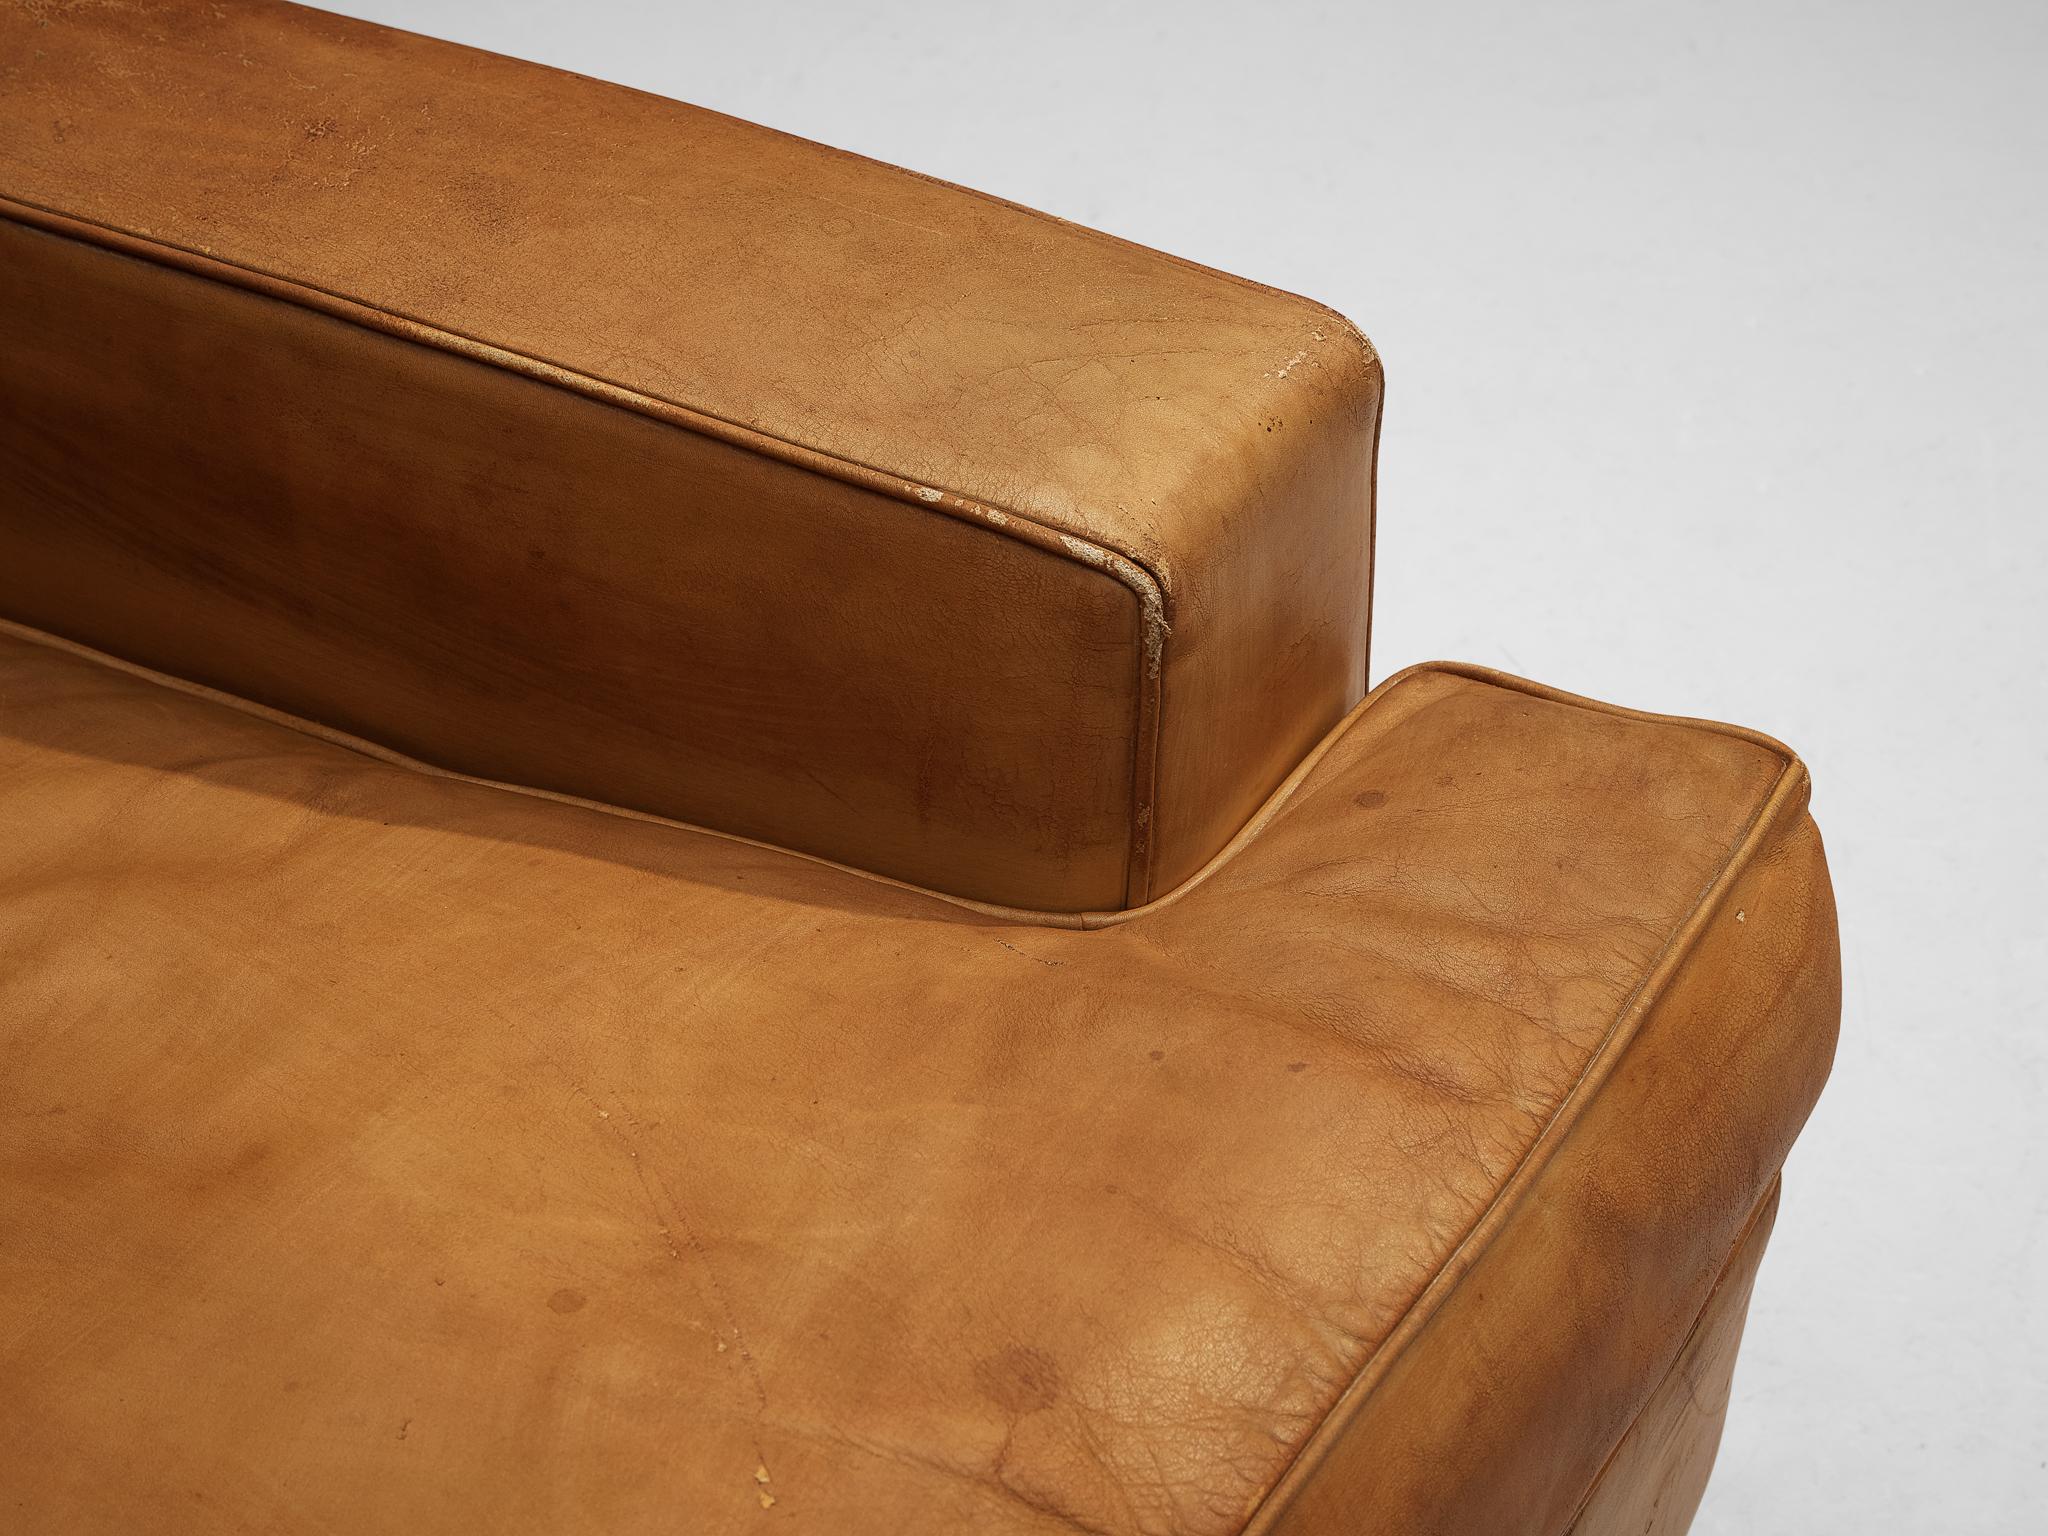 Marco Zanuso for Arflex Pair of ‘Square’ Lounge Chairs in Cognac Leather 1